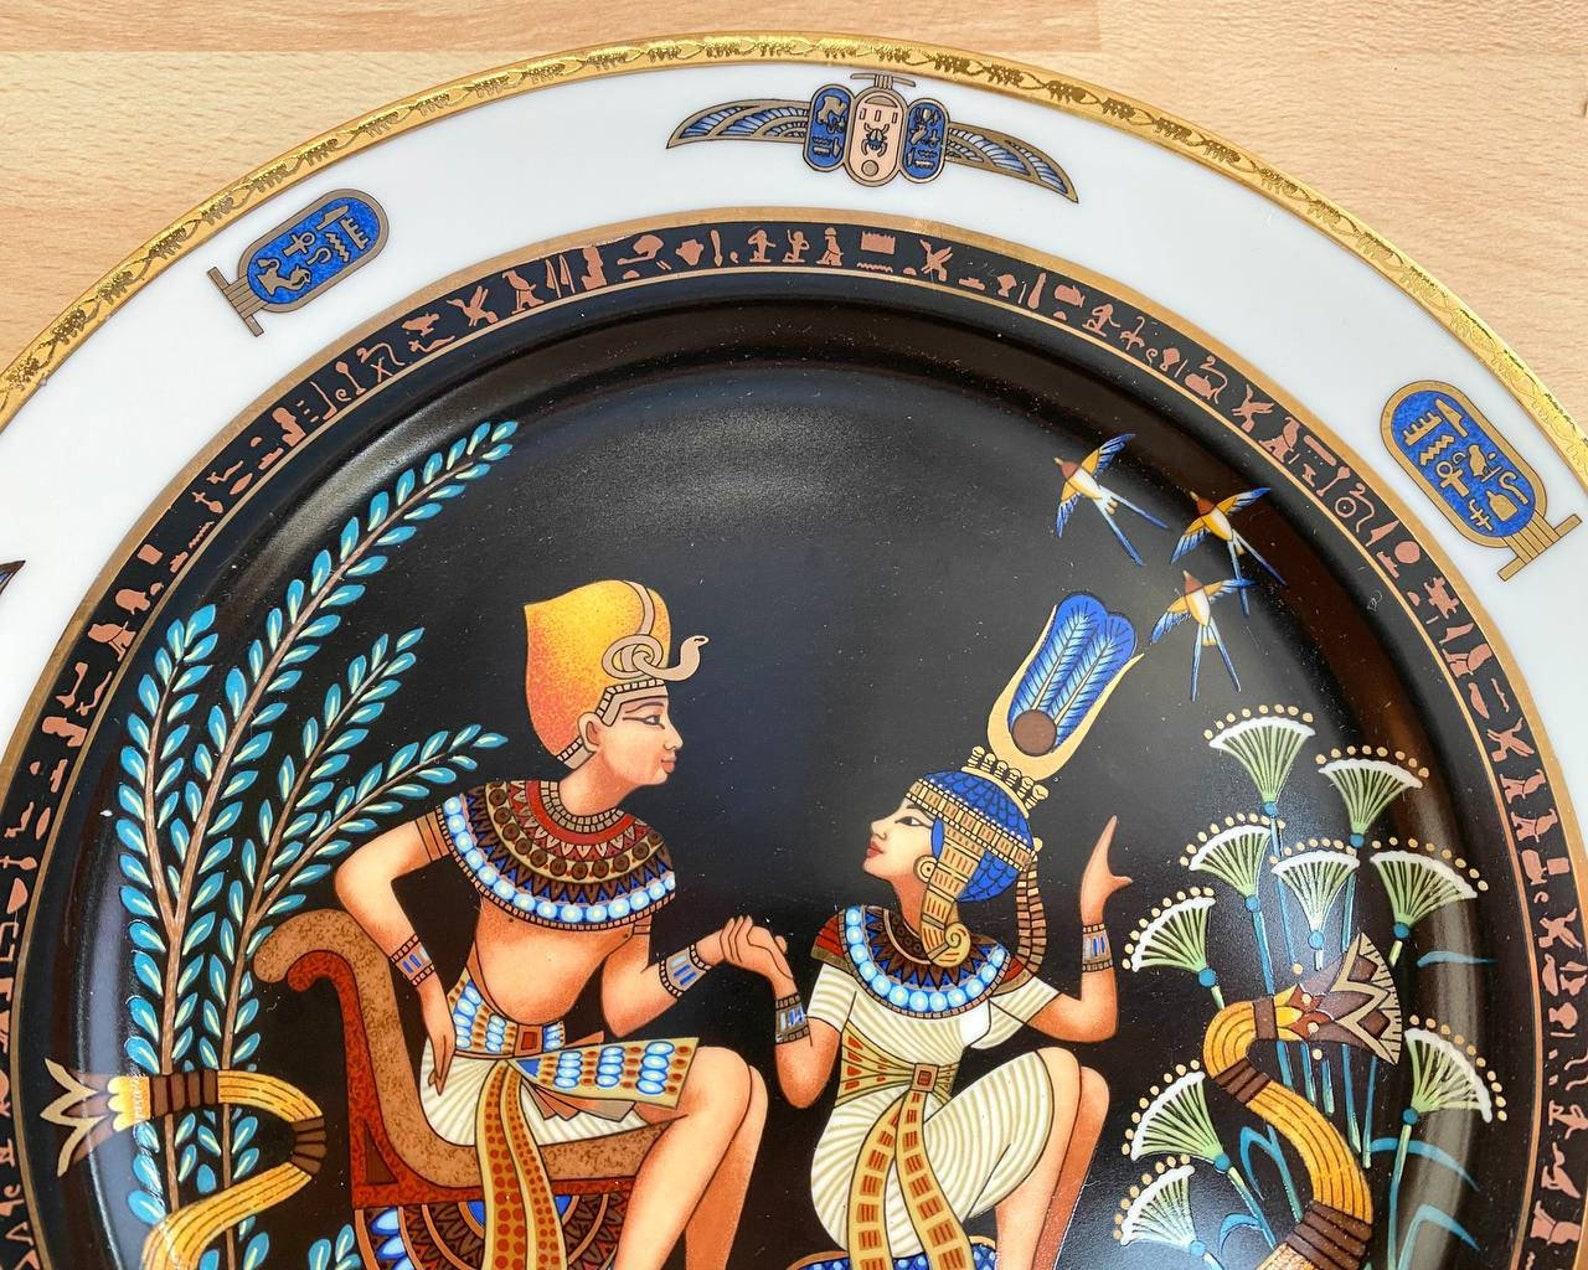 Decorative plate with an Egyptian theme.

Porcelain vivid multicolored plate with white rim. Luxury Plate with an ancient Egyptian scene is made by FINE ROYAL PORCELAIN SCULPTURE of Egypt.

The plate is richly decorated with gilding. The artist